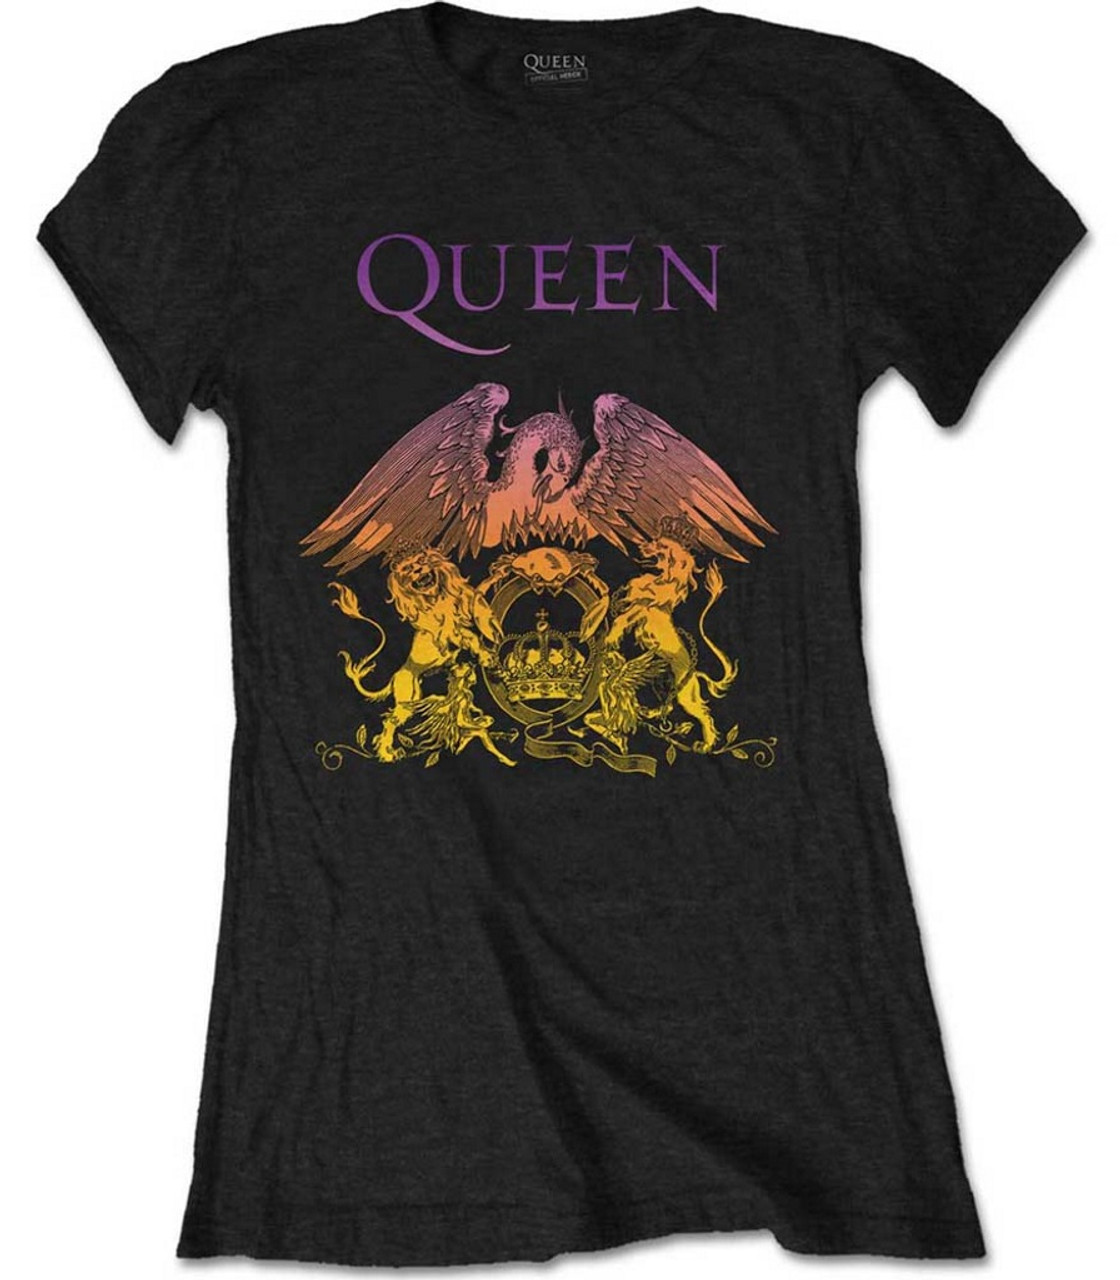 Queen 'Gradient Crest' (Black) Womens Fitted T-Shirt